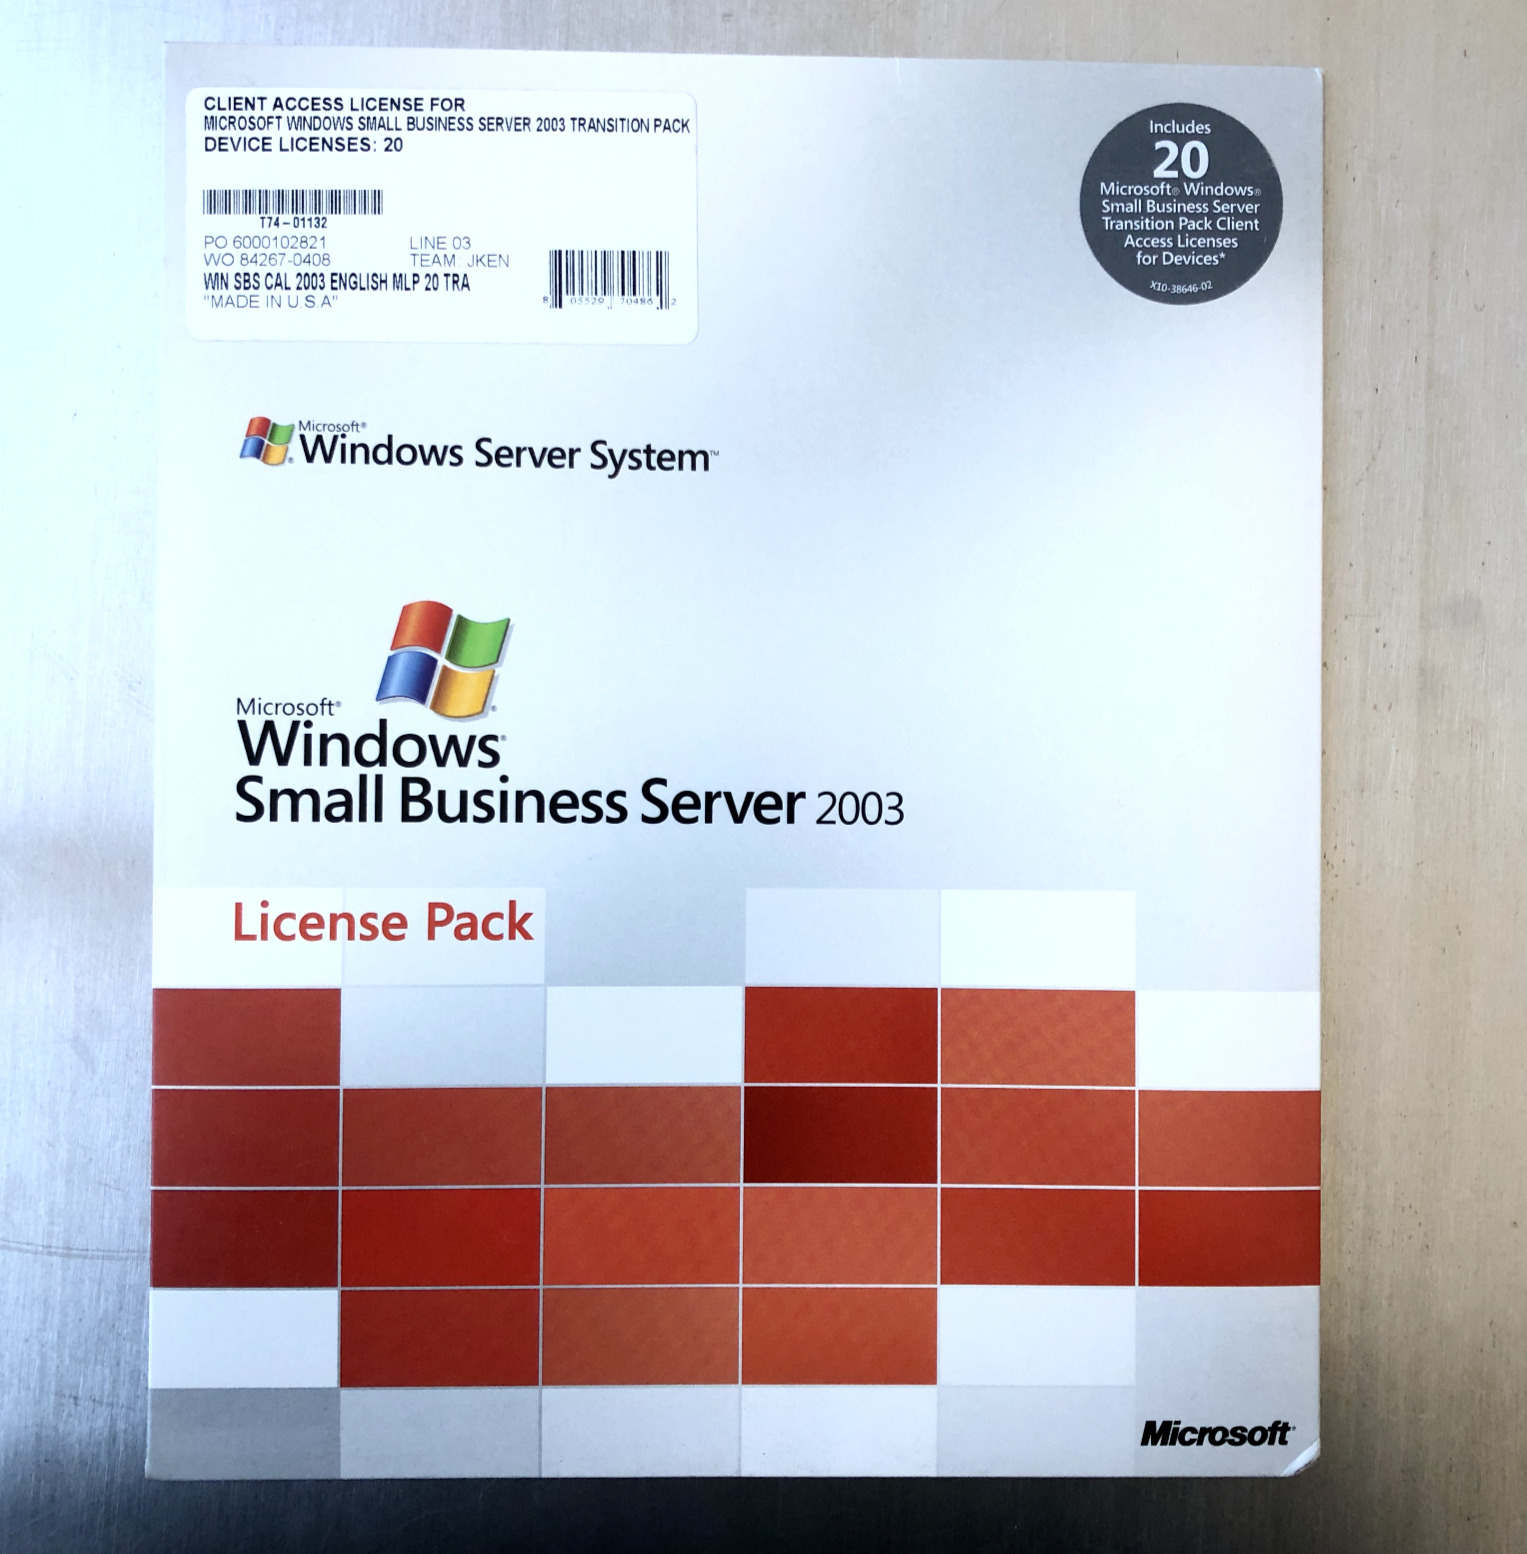 Microsoft Windows Small Business Server 2003 License Pack (20 Licenses)